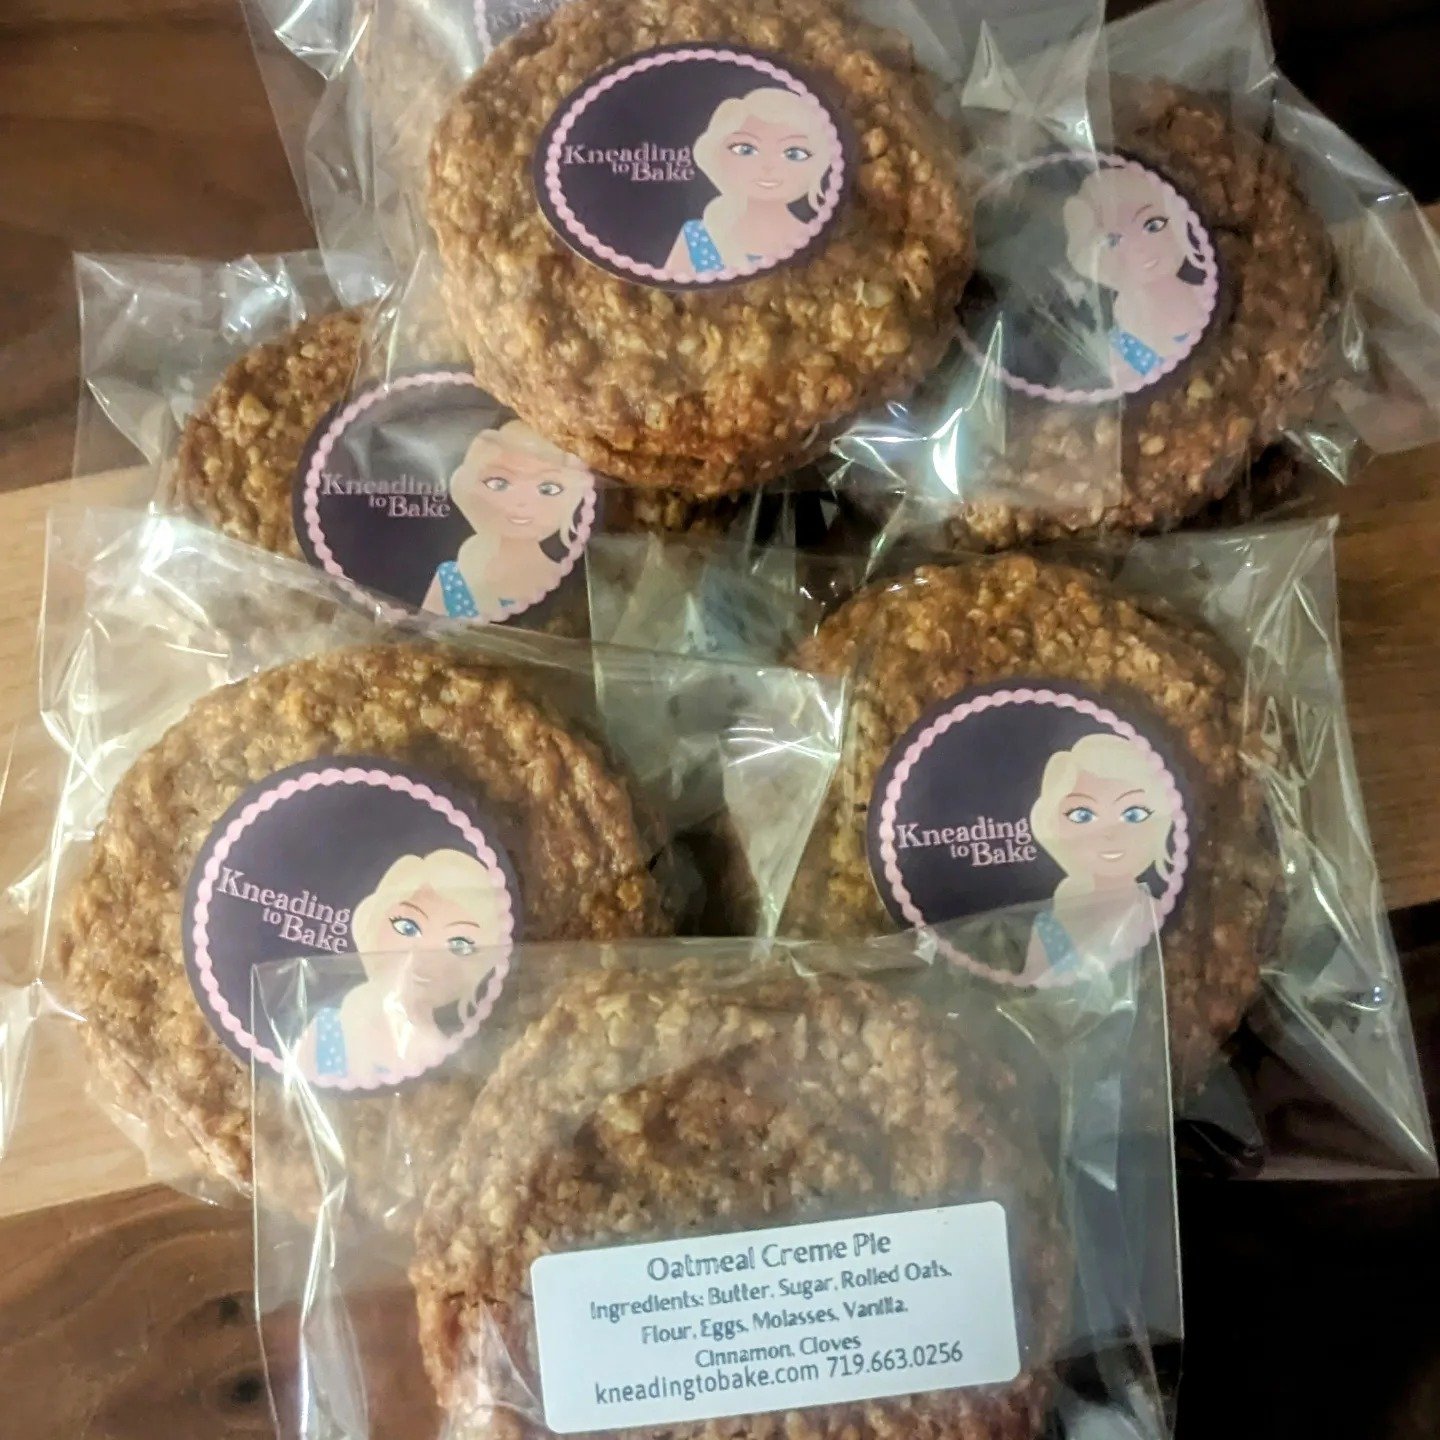 #NationalOatmealCookieDay is on April 30, and we don't want to leave you stranded! 🍪 Swing by the Nolensville Farmers Market to satisfy your sweet tooth with some freshly baked oatmeal cookies from @kneadingtobake .